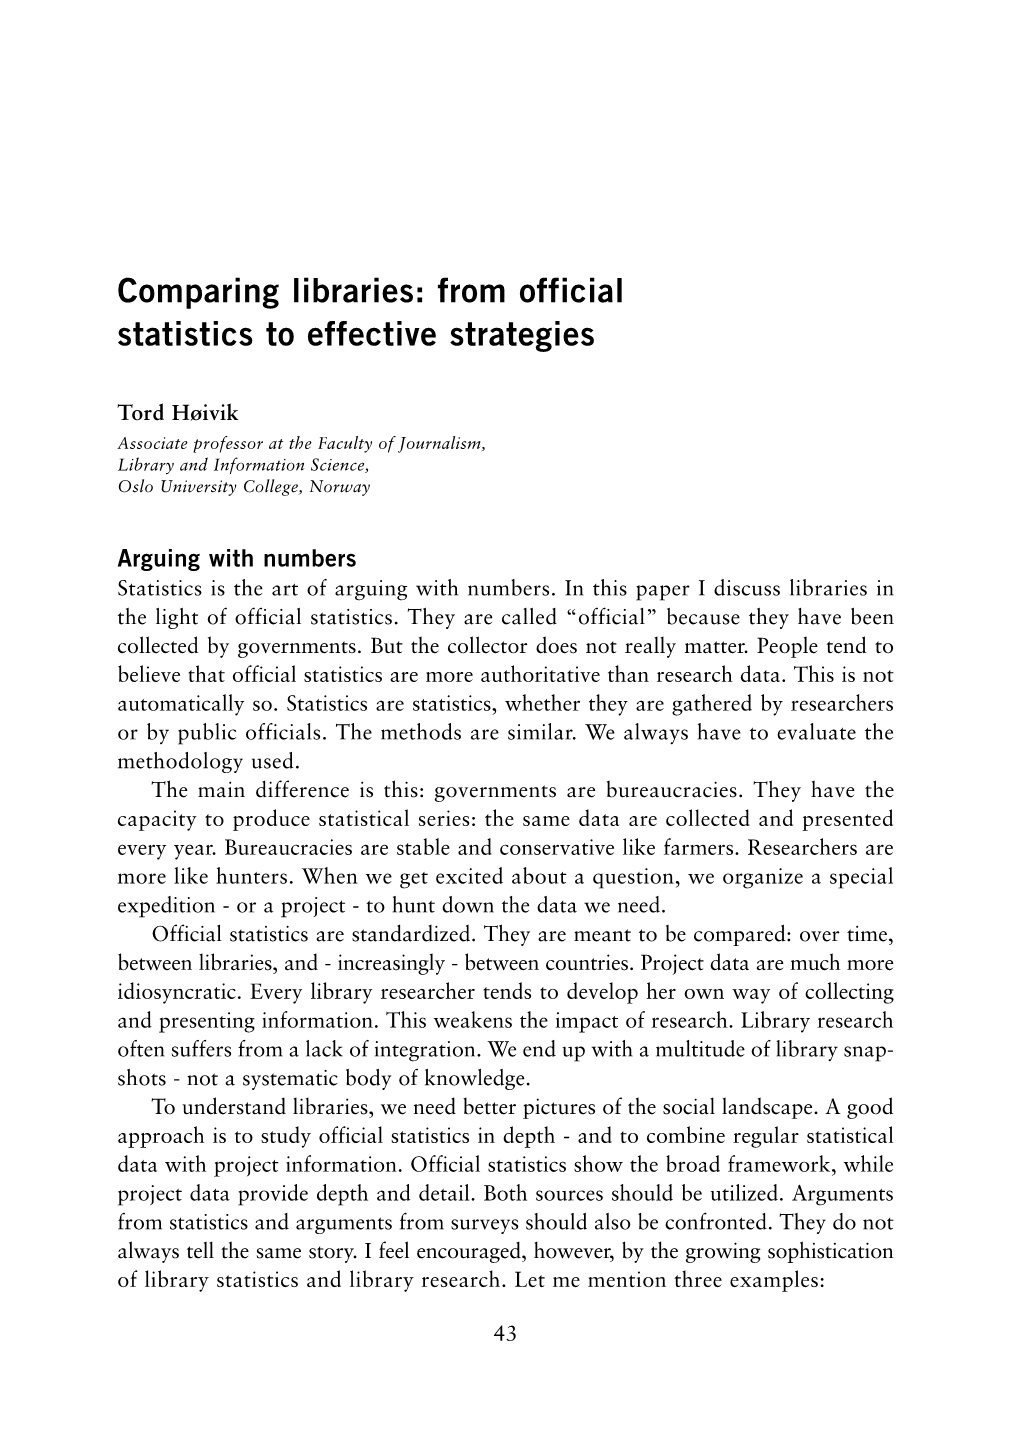 Comparing Libraries: from Official Statistics to Effective Strategies